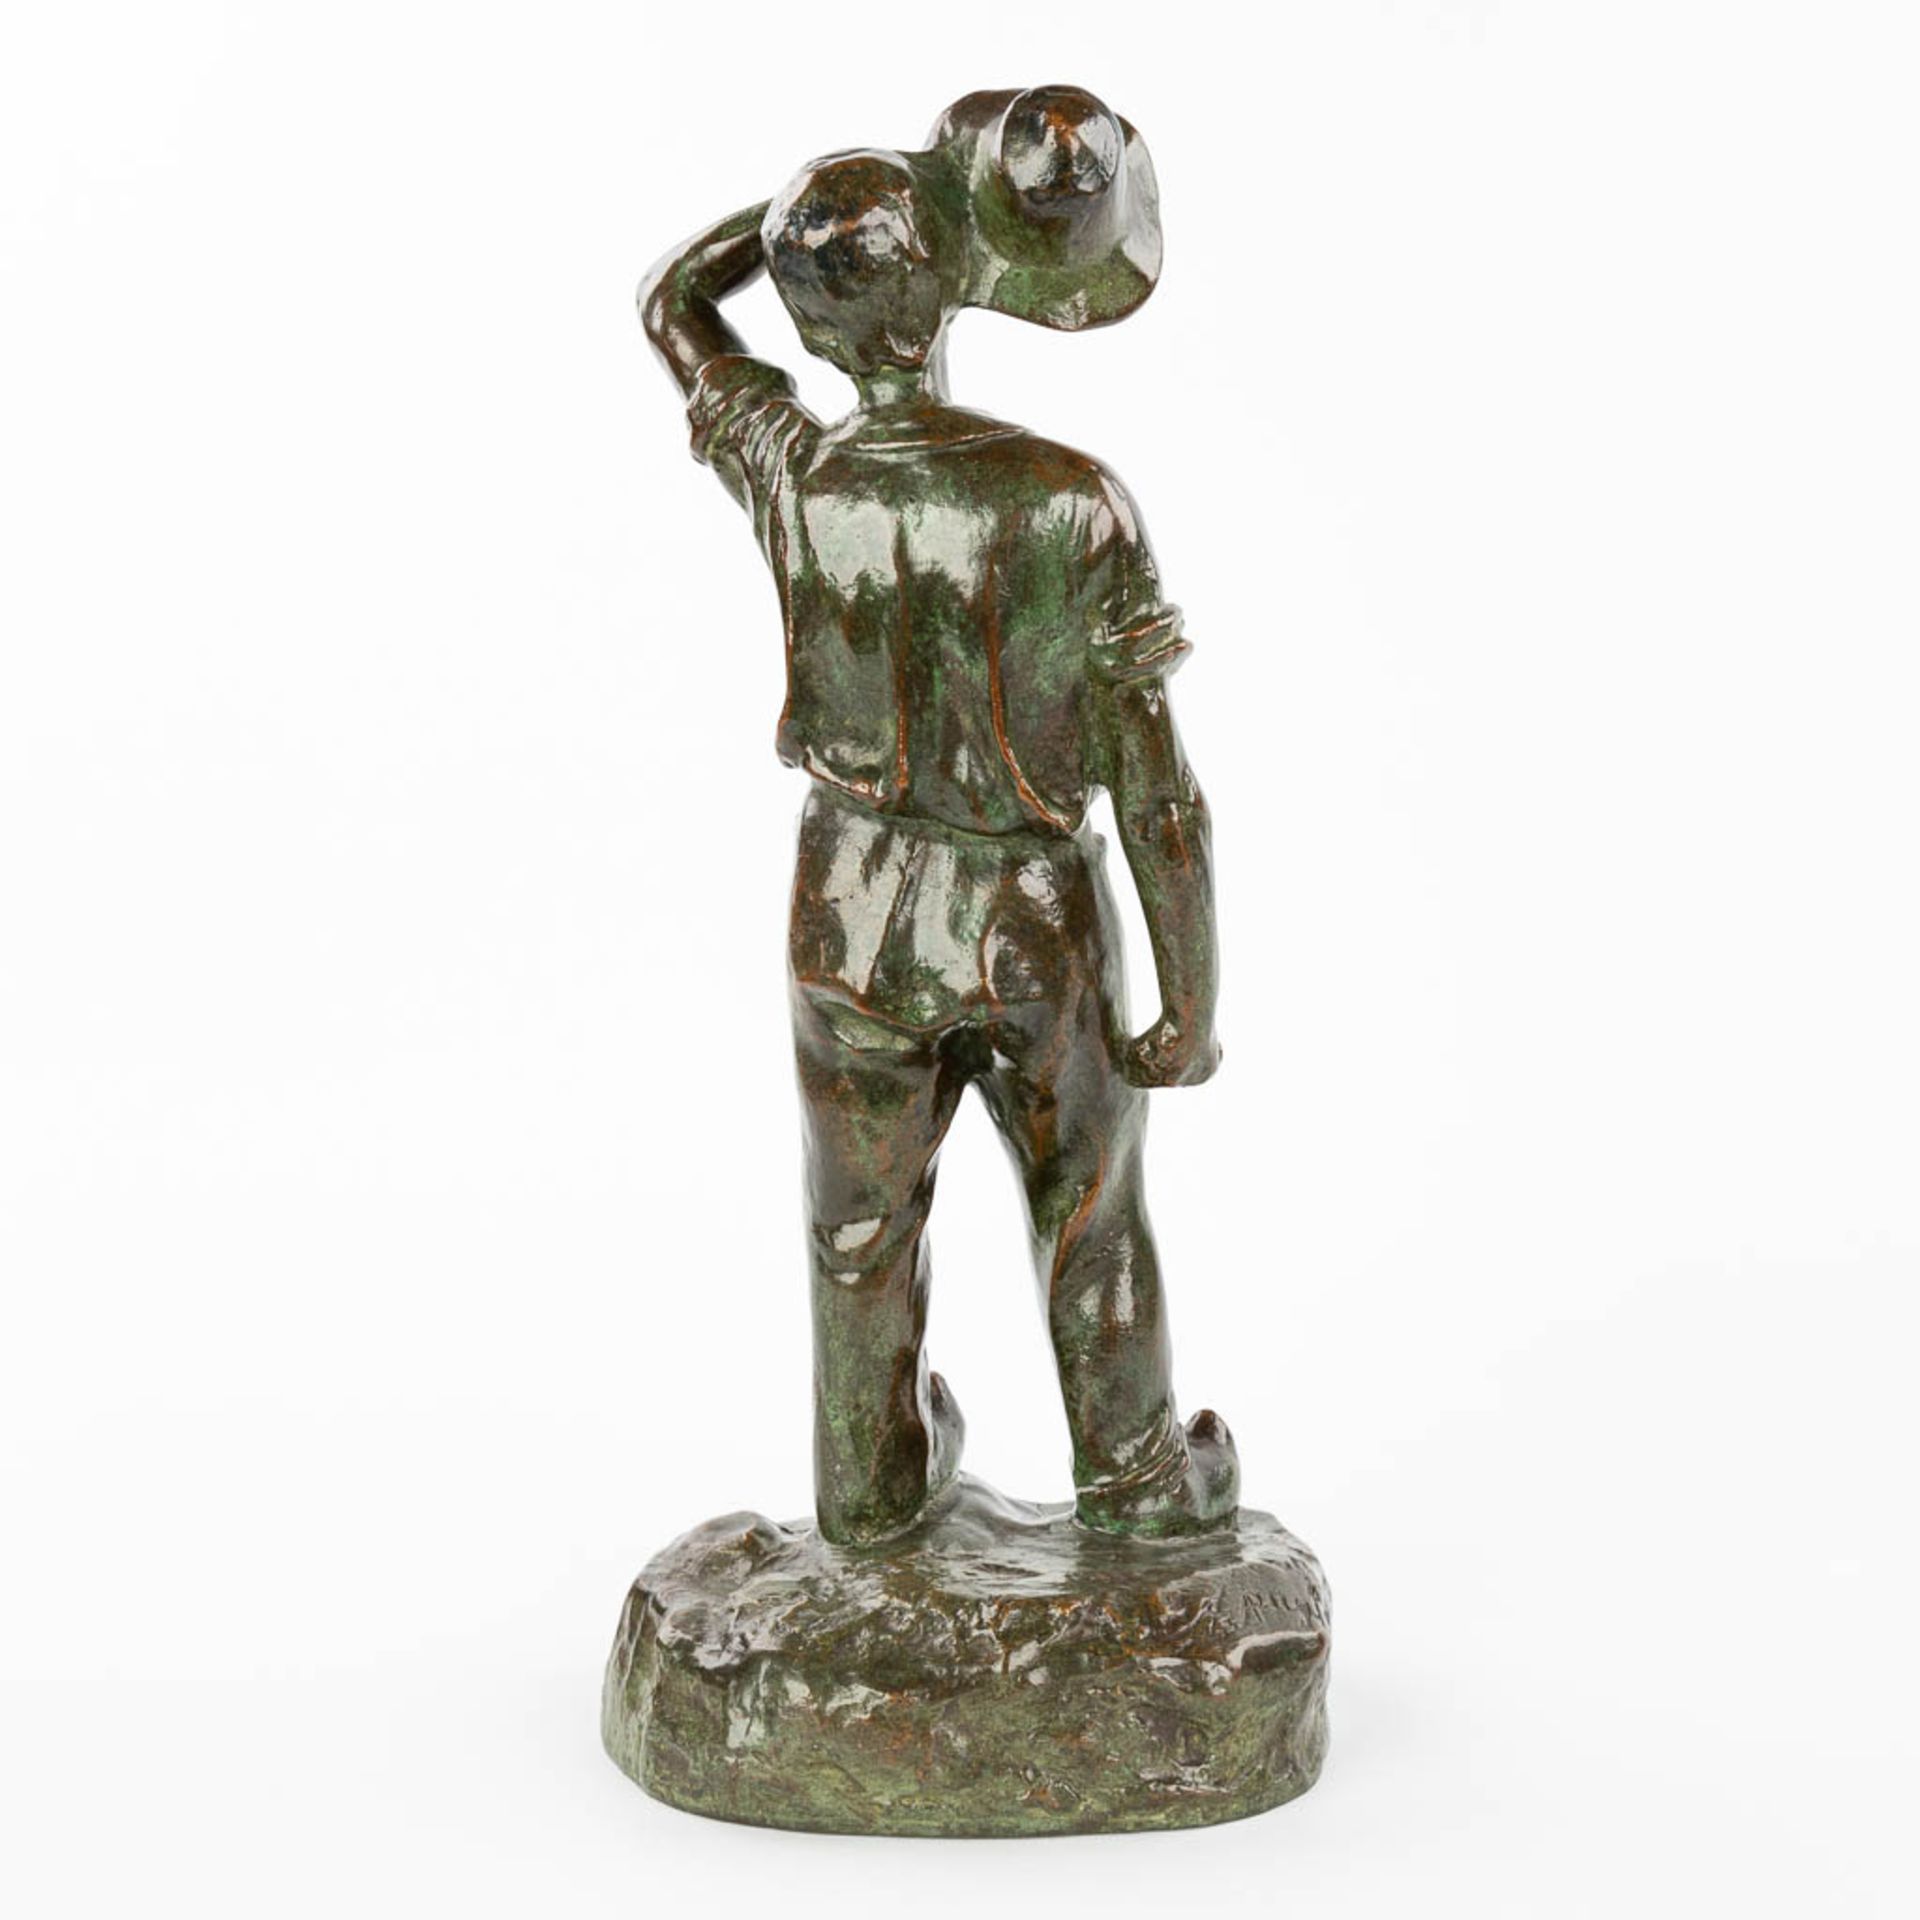 Arthur PUYT (1873-1955) 'Man with the hat', patinated bronze. (H:40cm) - Image 9 of 10